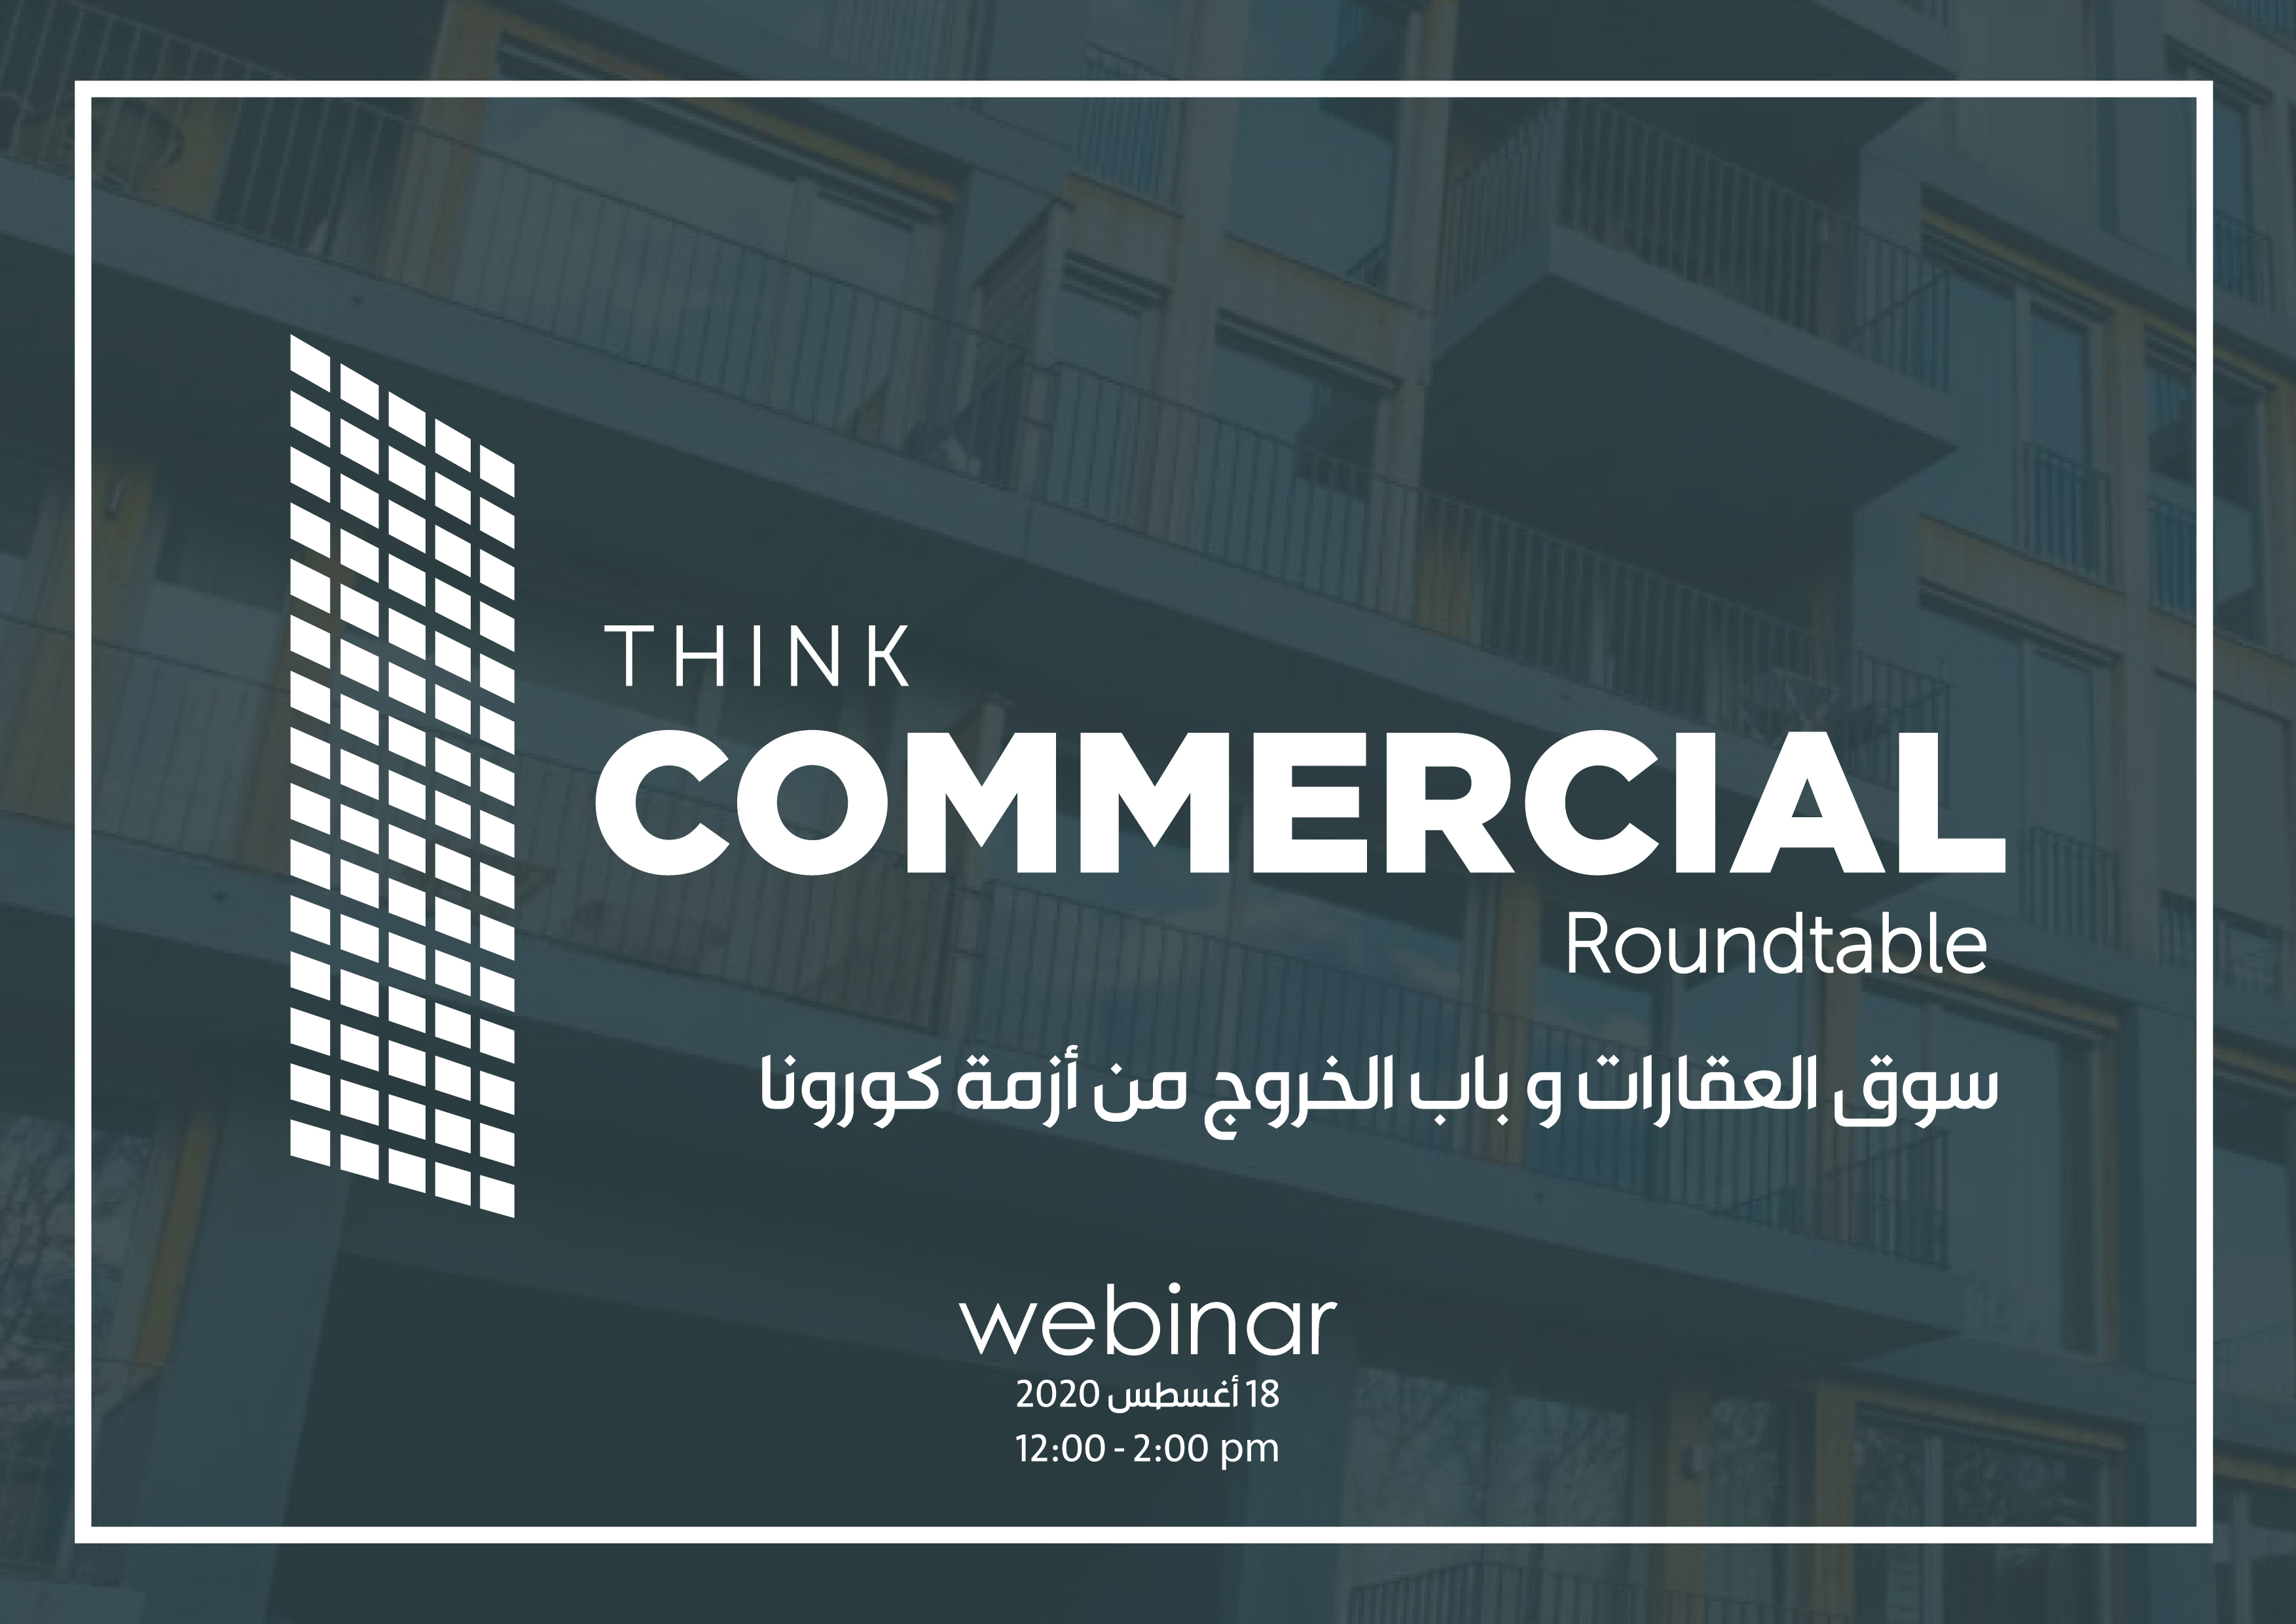 Think Commercial Roundtable webinar August 2020